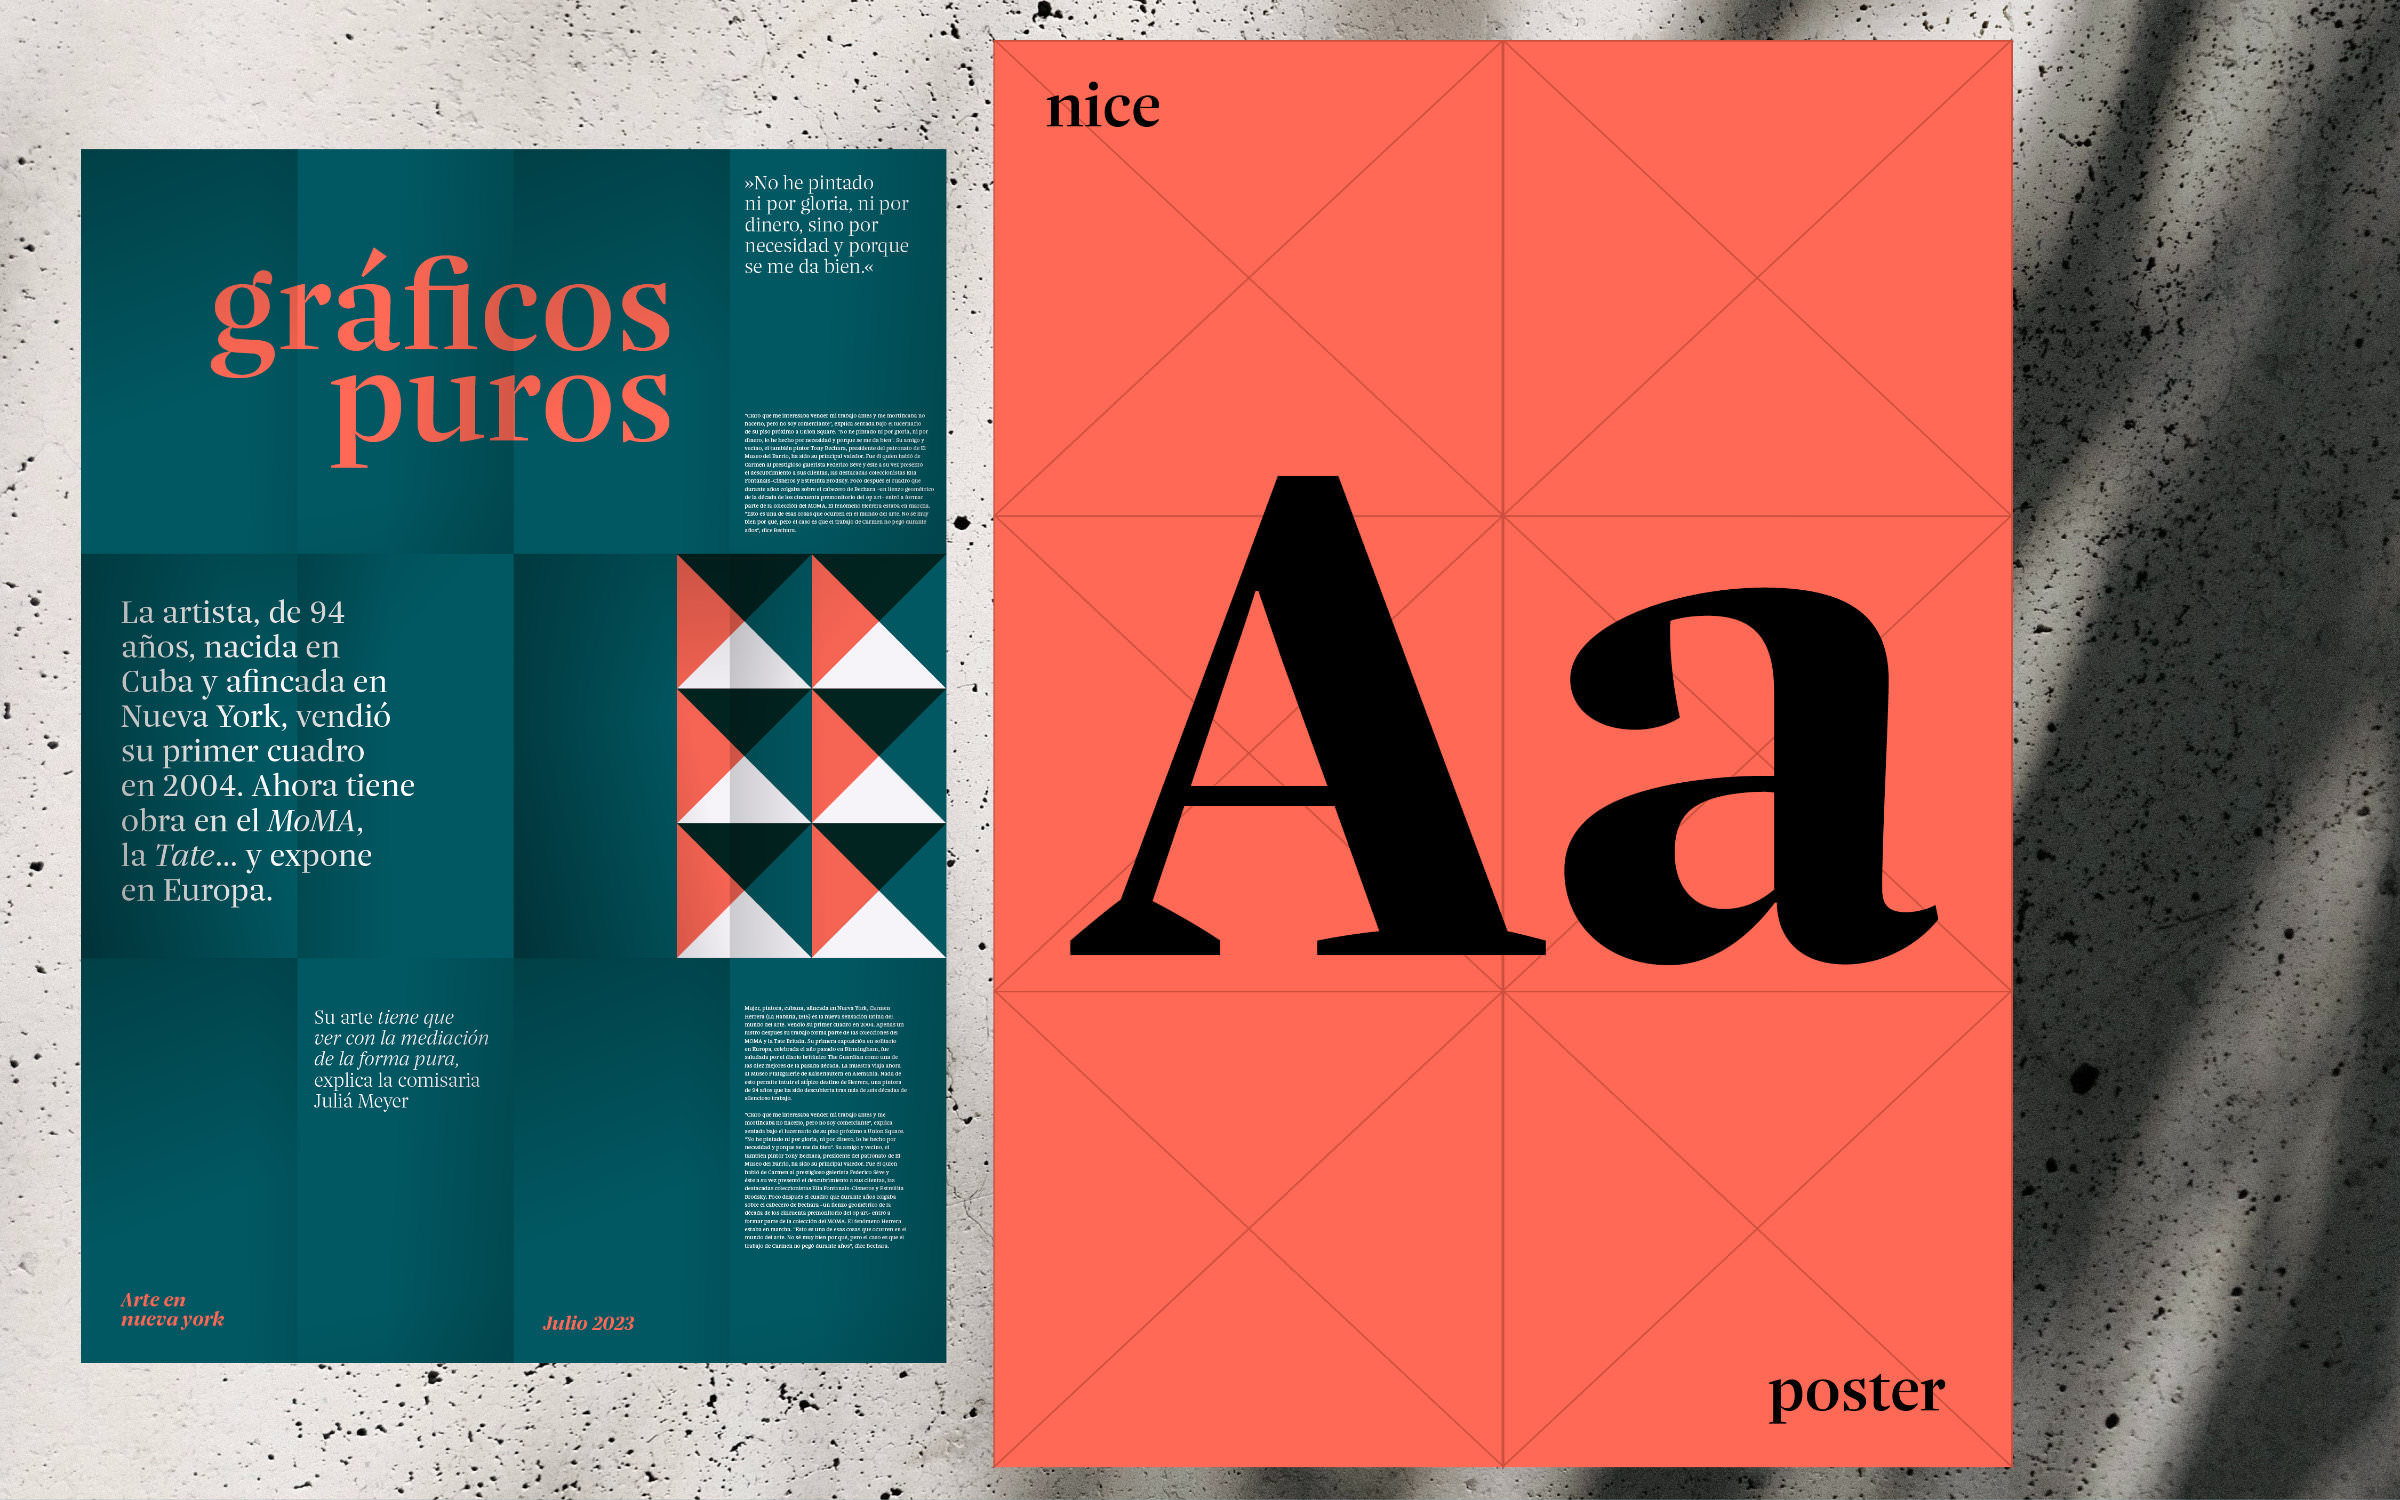 Nice Type System, designed by Jan Fromm – fictitious poster design